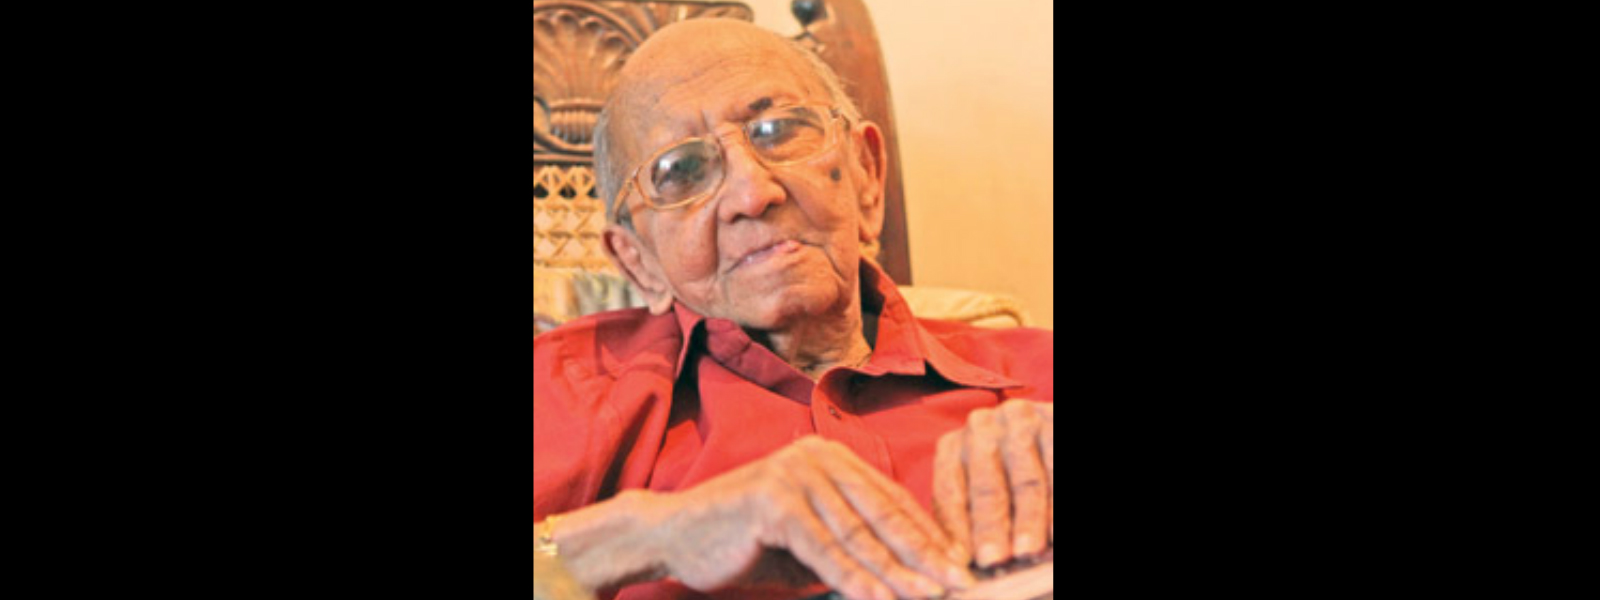 Final rites of Dr. Lester to be performed on May 2